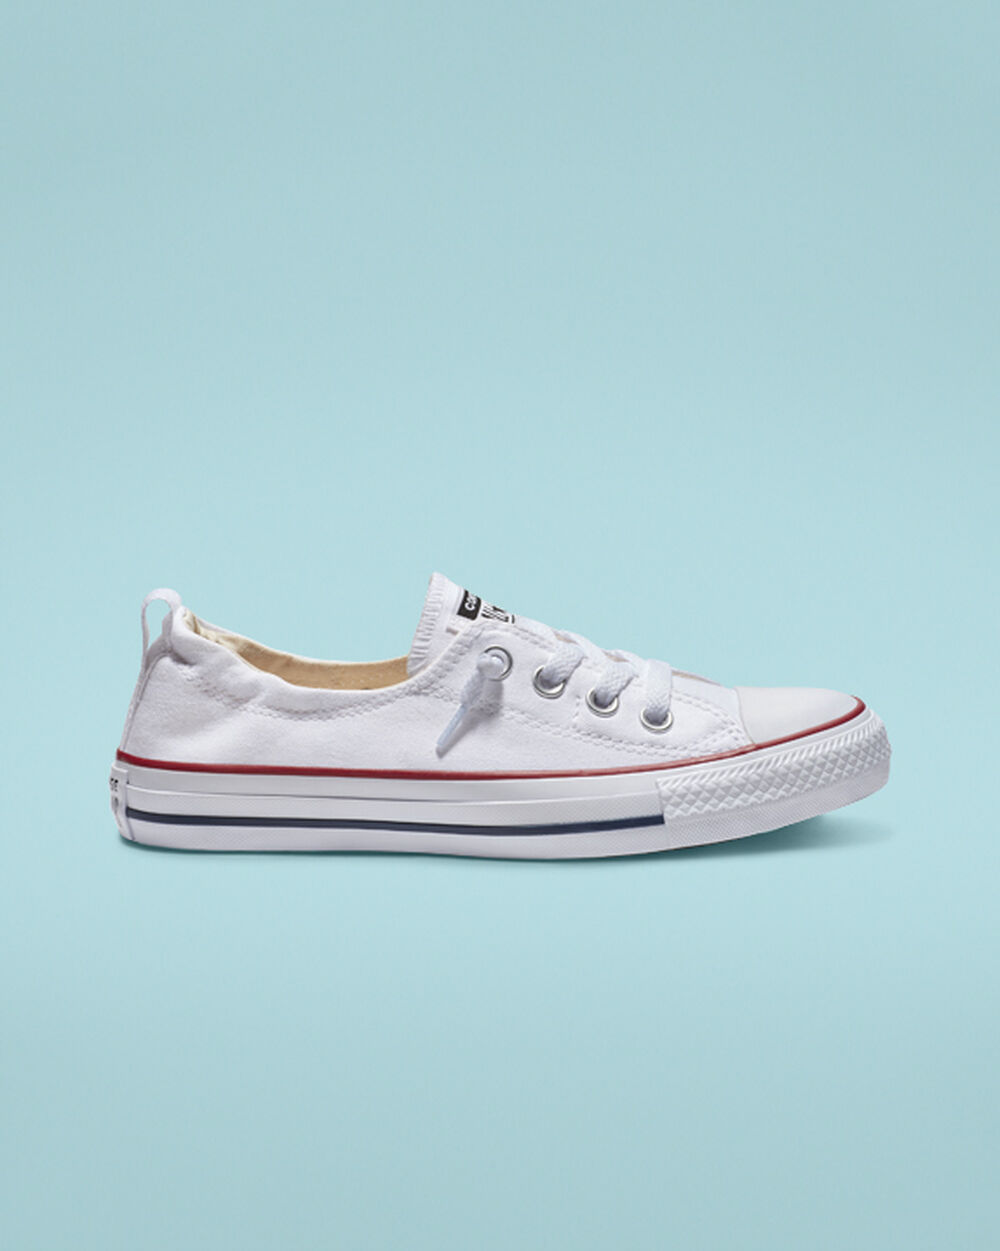 Slip On Converse Chuck Taylor All Star Mujer Blancos | Mexico-630266